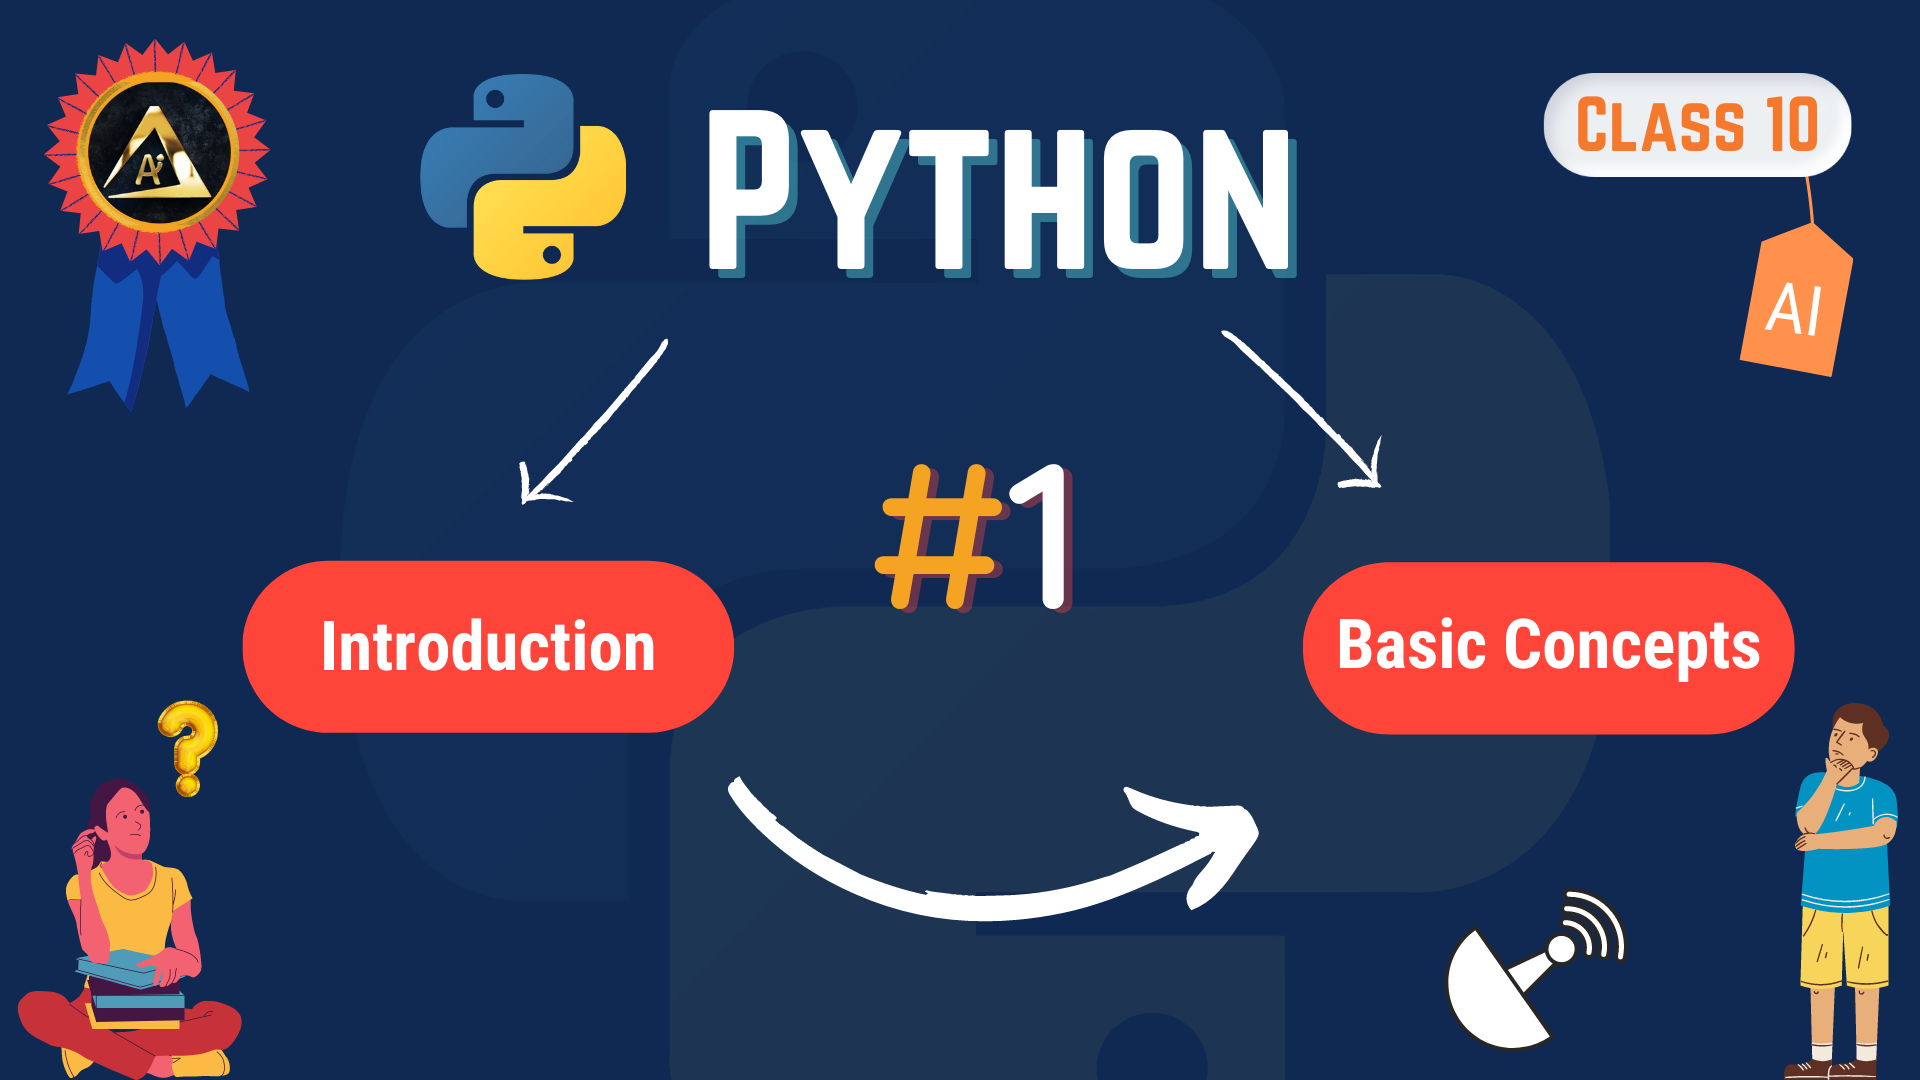 Python Programming for Class 10 AI CBSE Notes